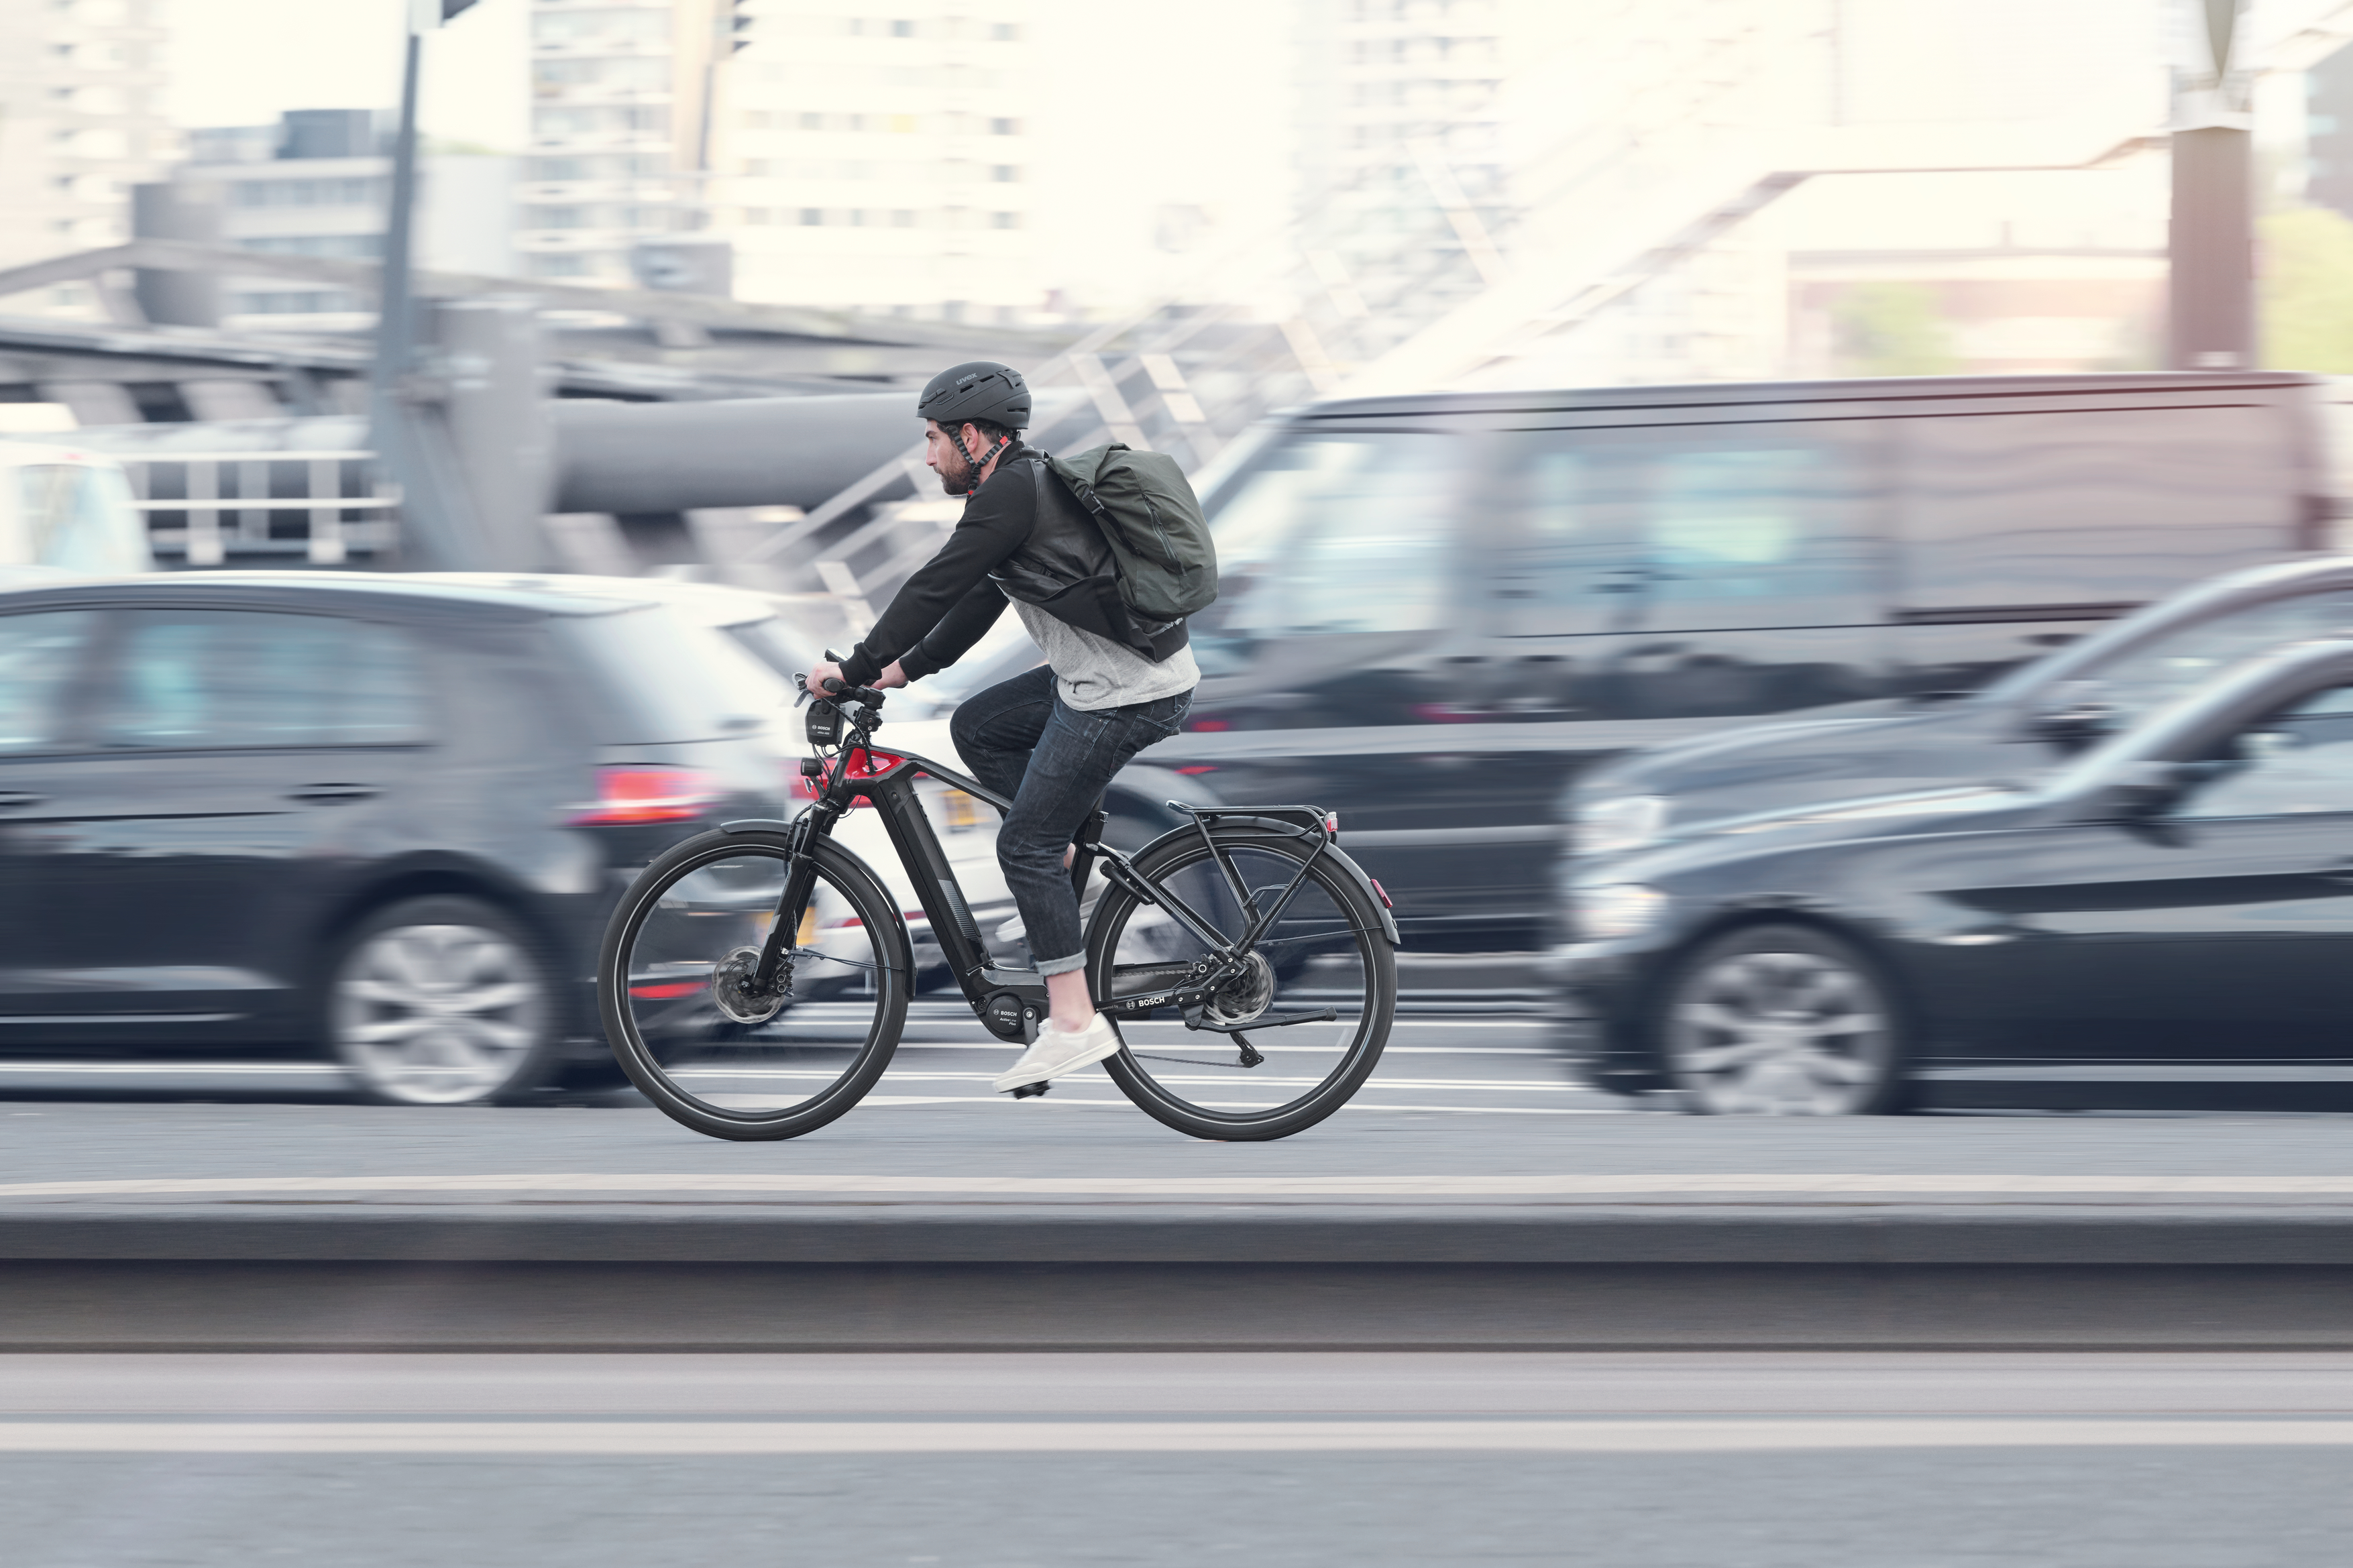 The eBike as an urban mobility option